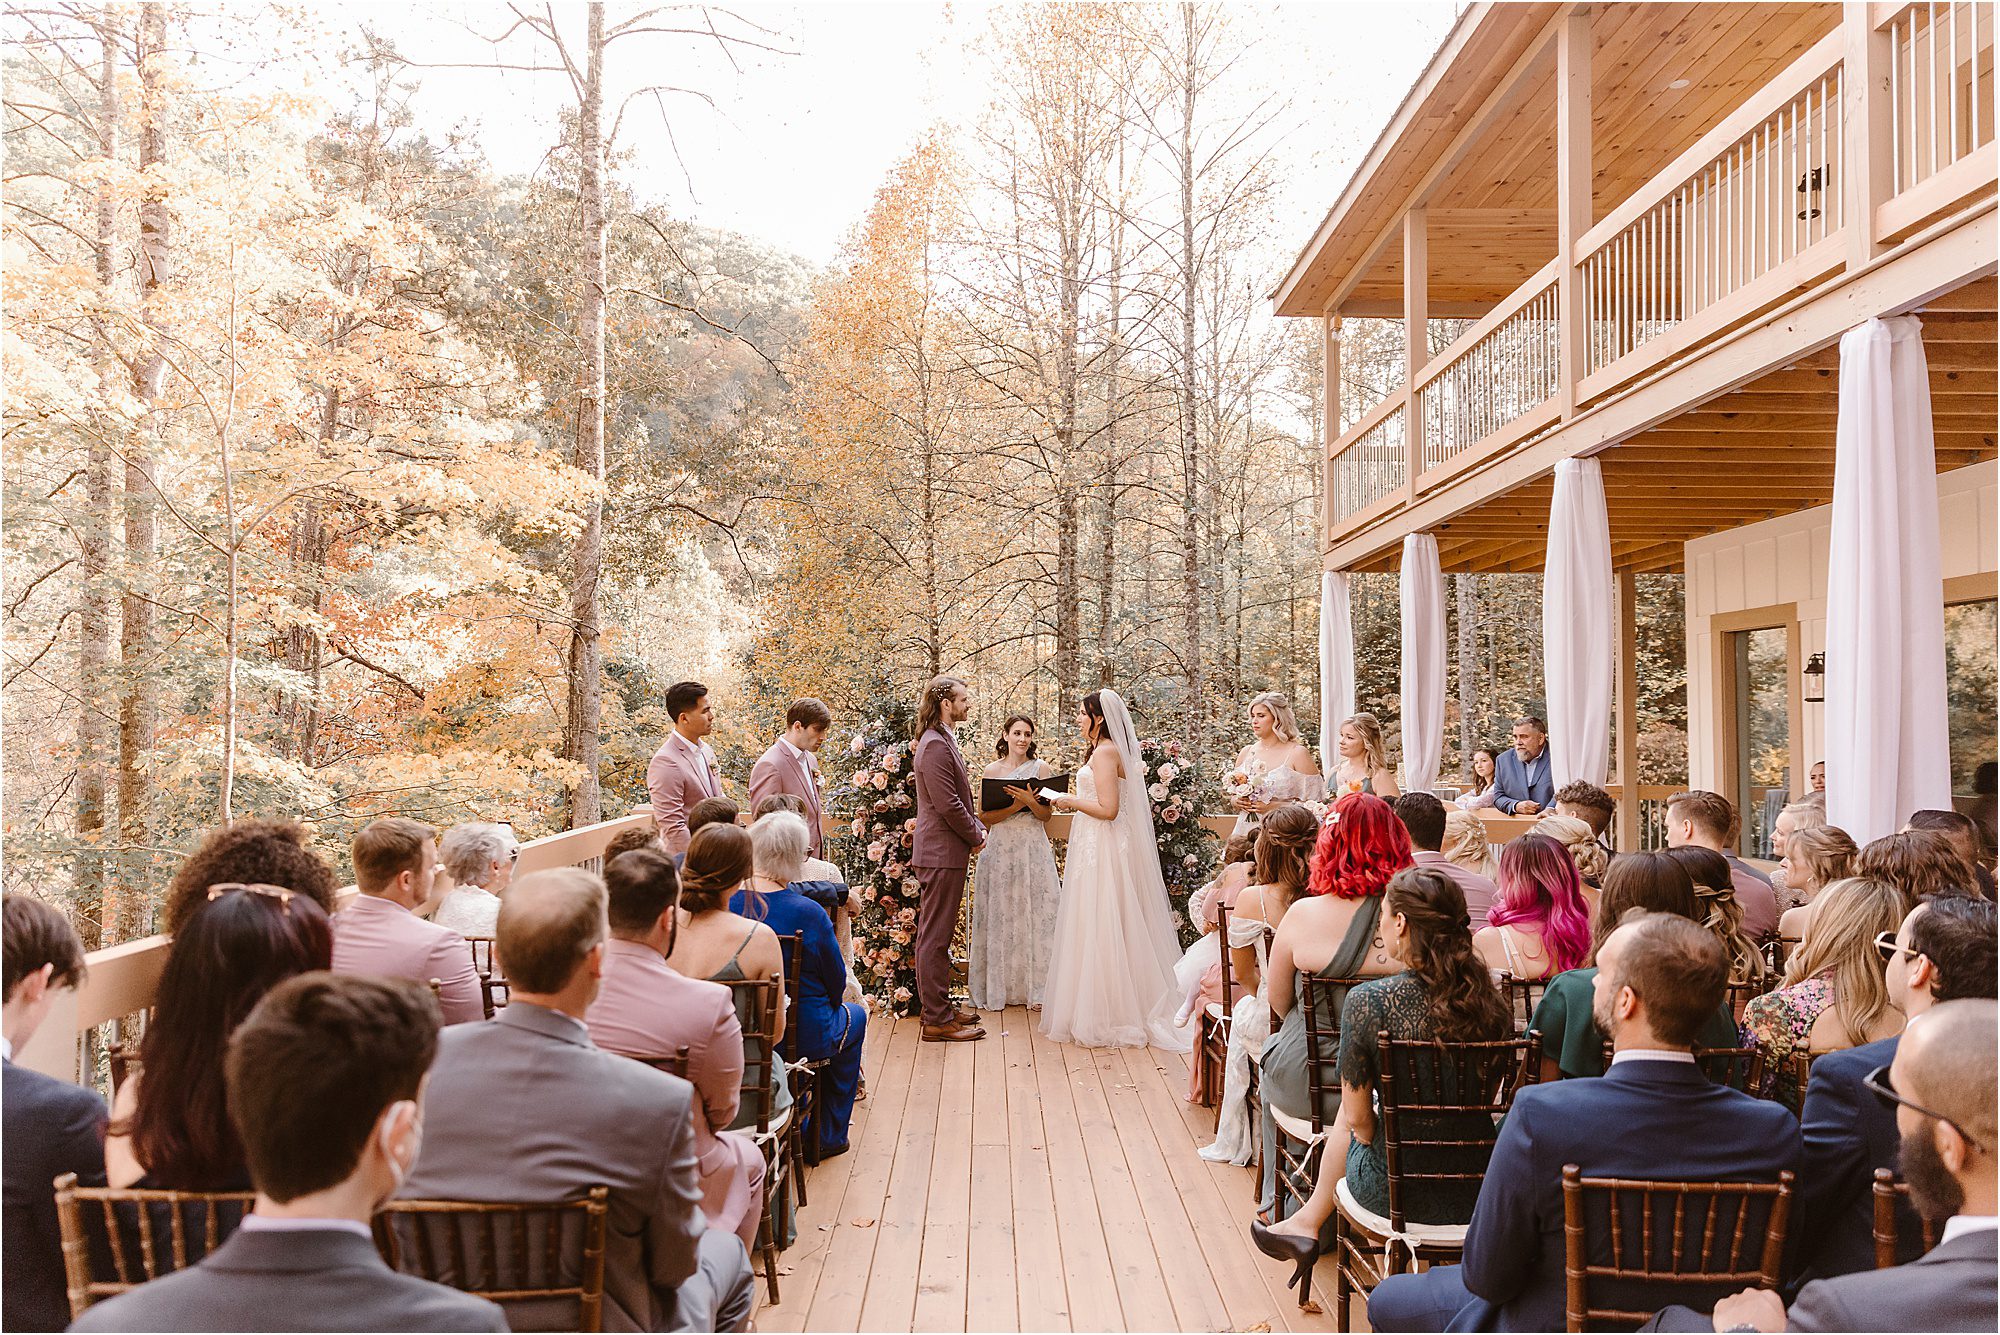 Private Pigeon Forge Wedding is a Modern, Fresh Take on Cabin Weddings